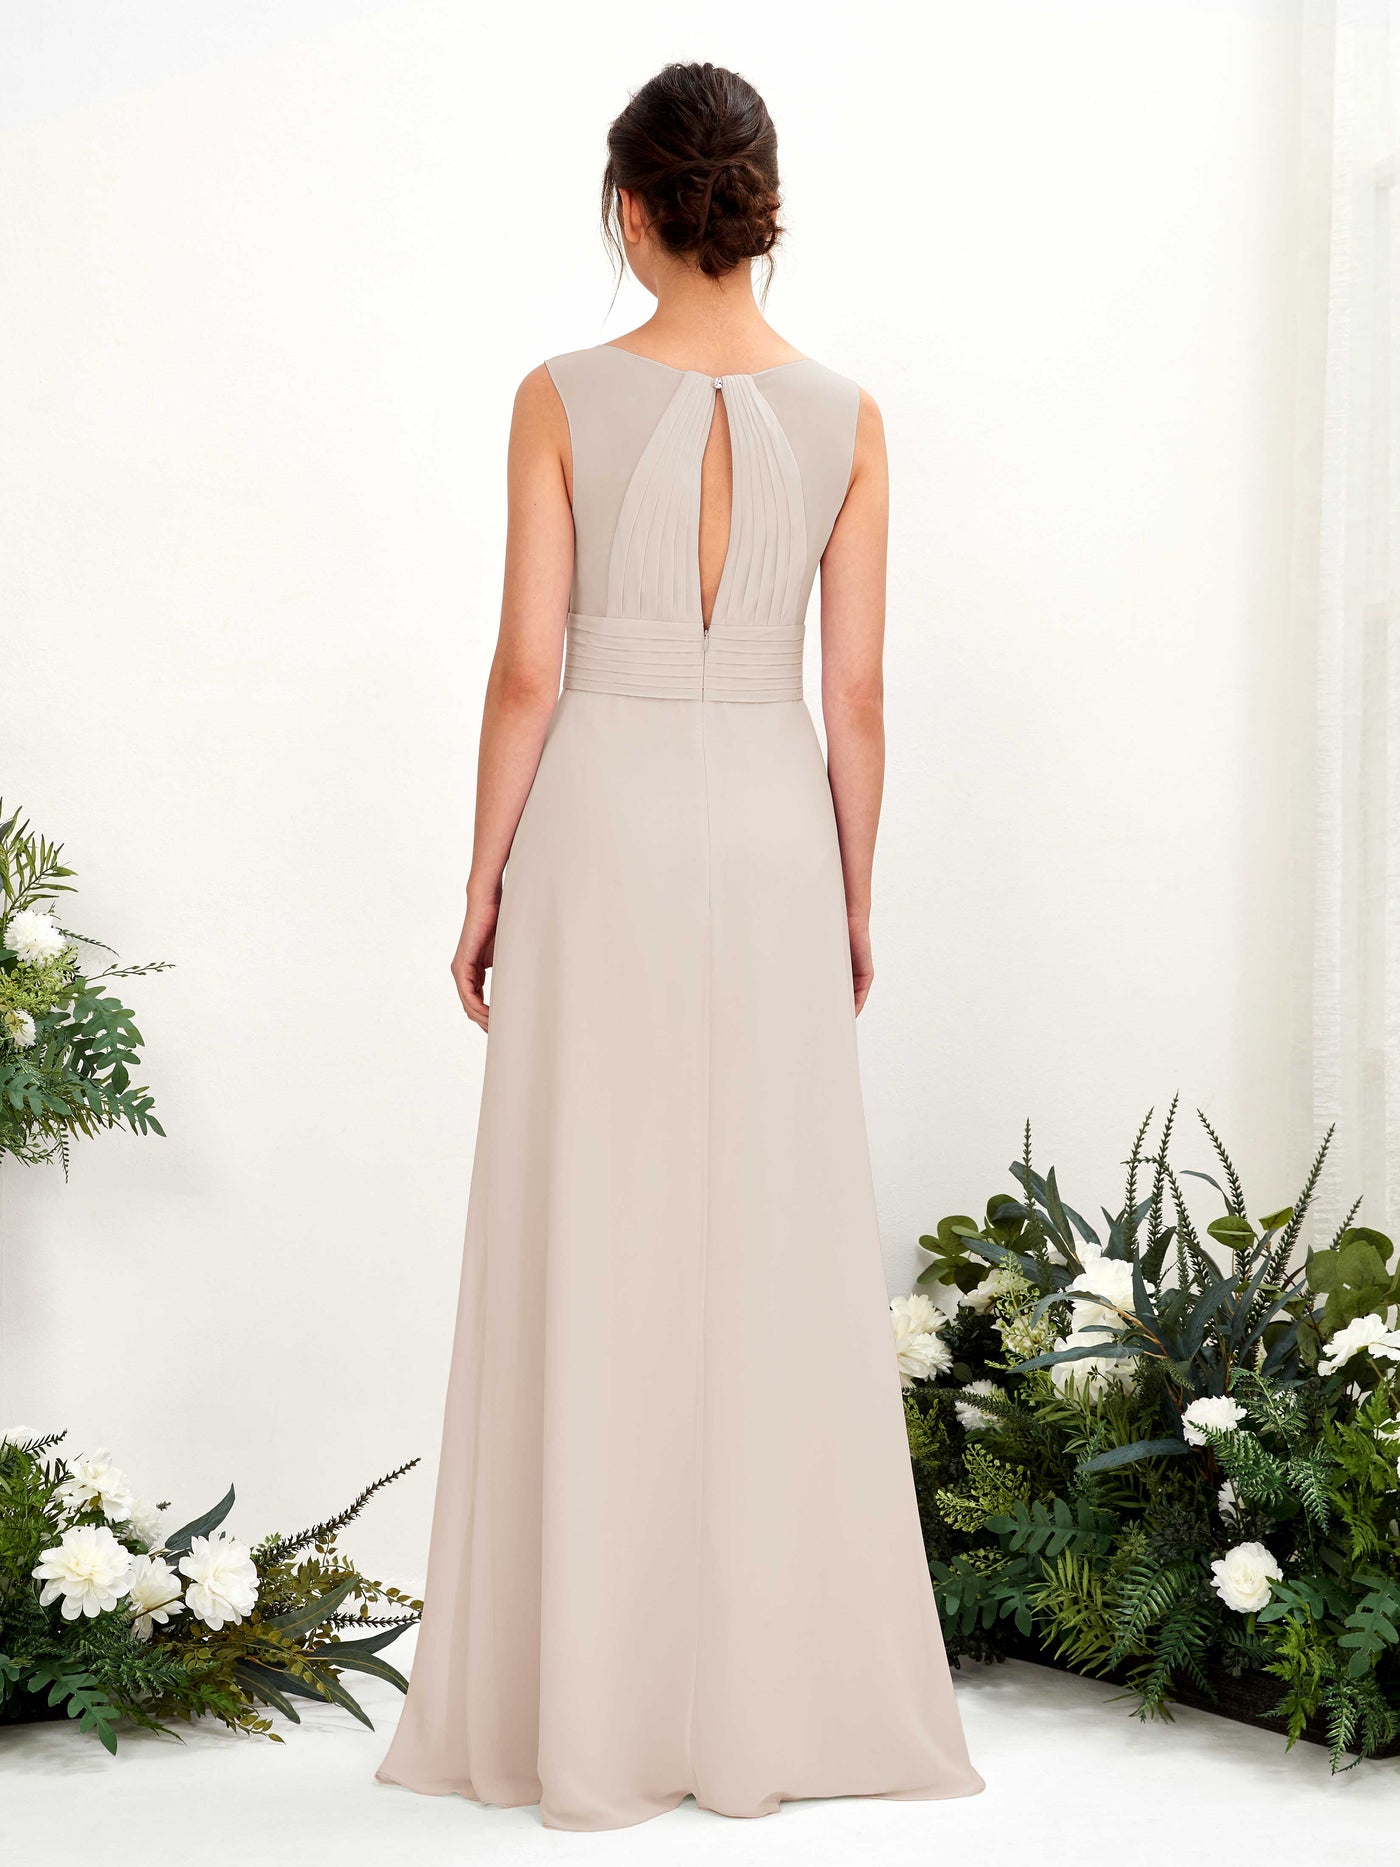 Champagne Bridesmaid Dresses Bridesmaid Dress A-line Chiffon Straps Full Length Sleeveless Wedding Party Dress (81220916)#color_champagne